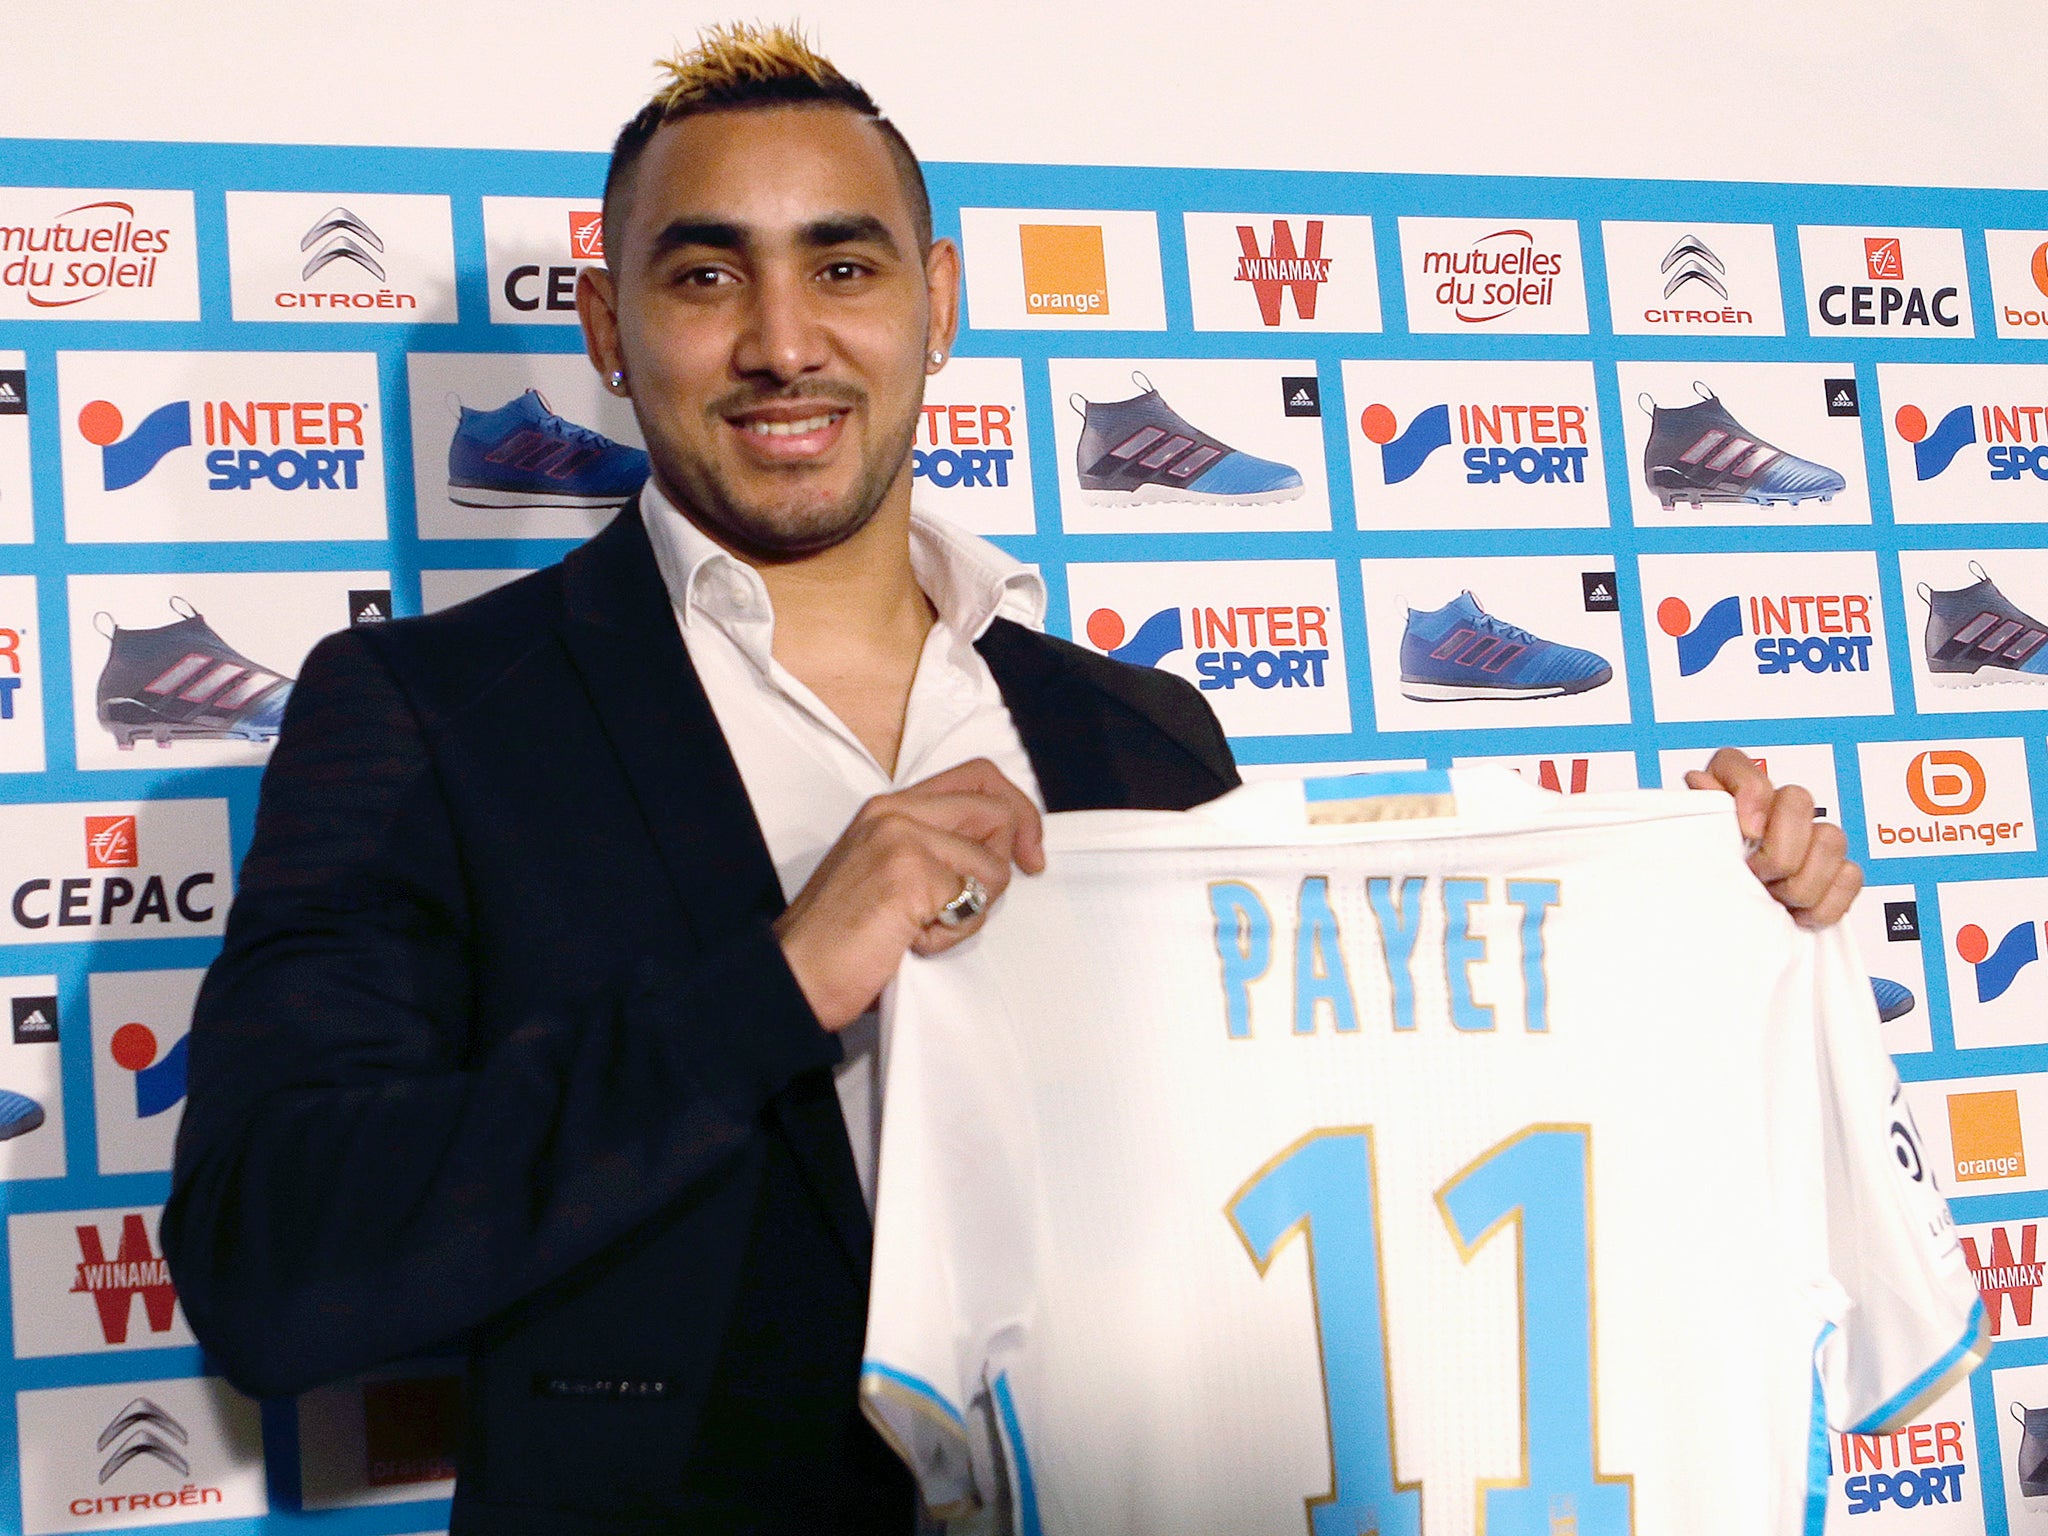 &#13;
Payet said he did not have to justify his behaviour to West Ham &#13;